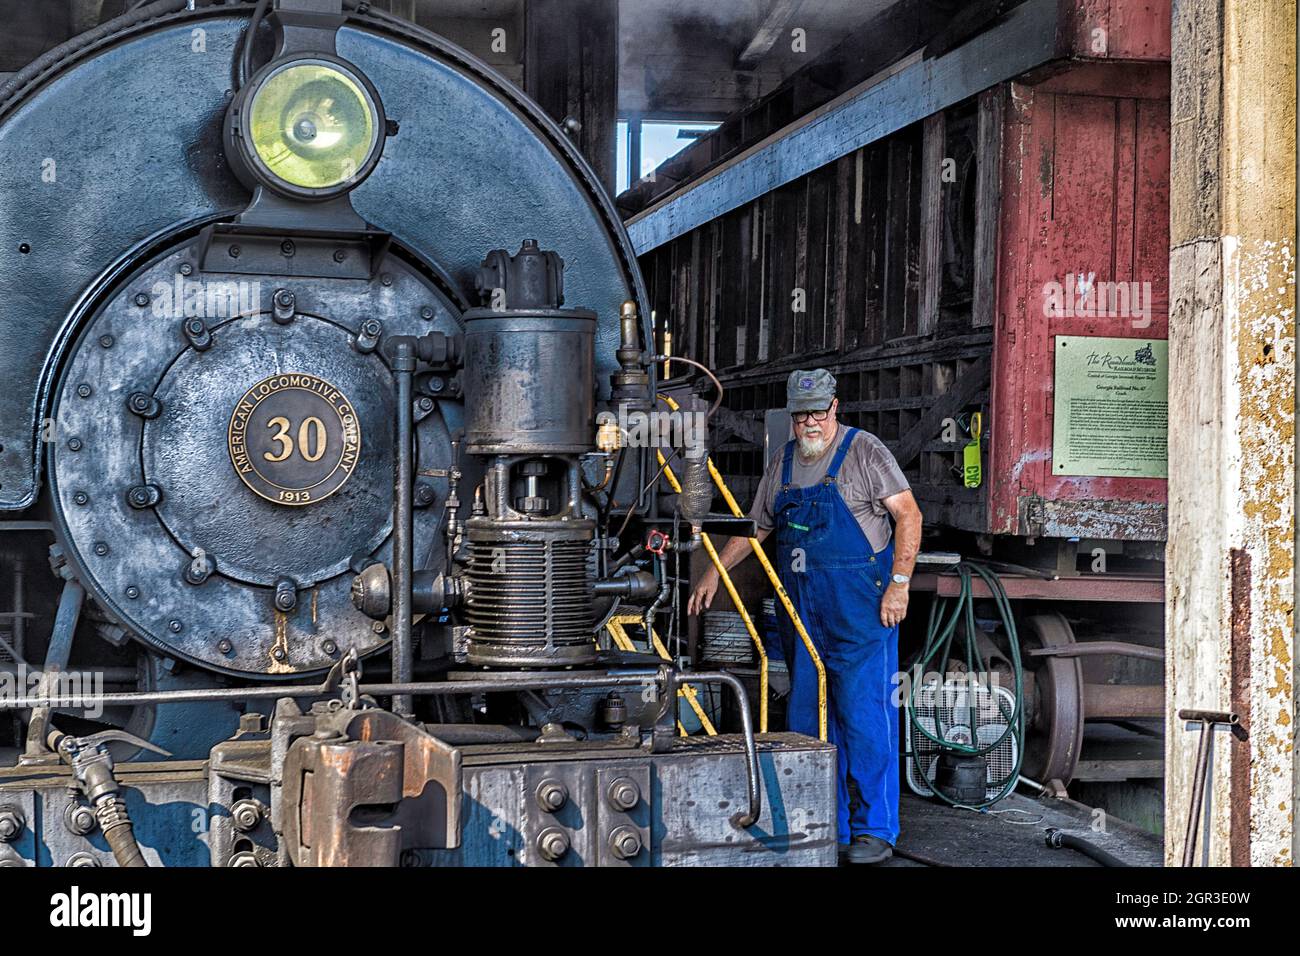 Engine driver inspecting the exterior of the historical Savannah Central #30 steam locomotive located at the Georgia State Railroad Museum Stock Photo